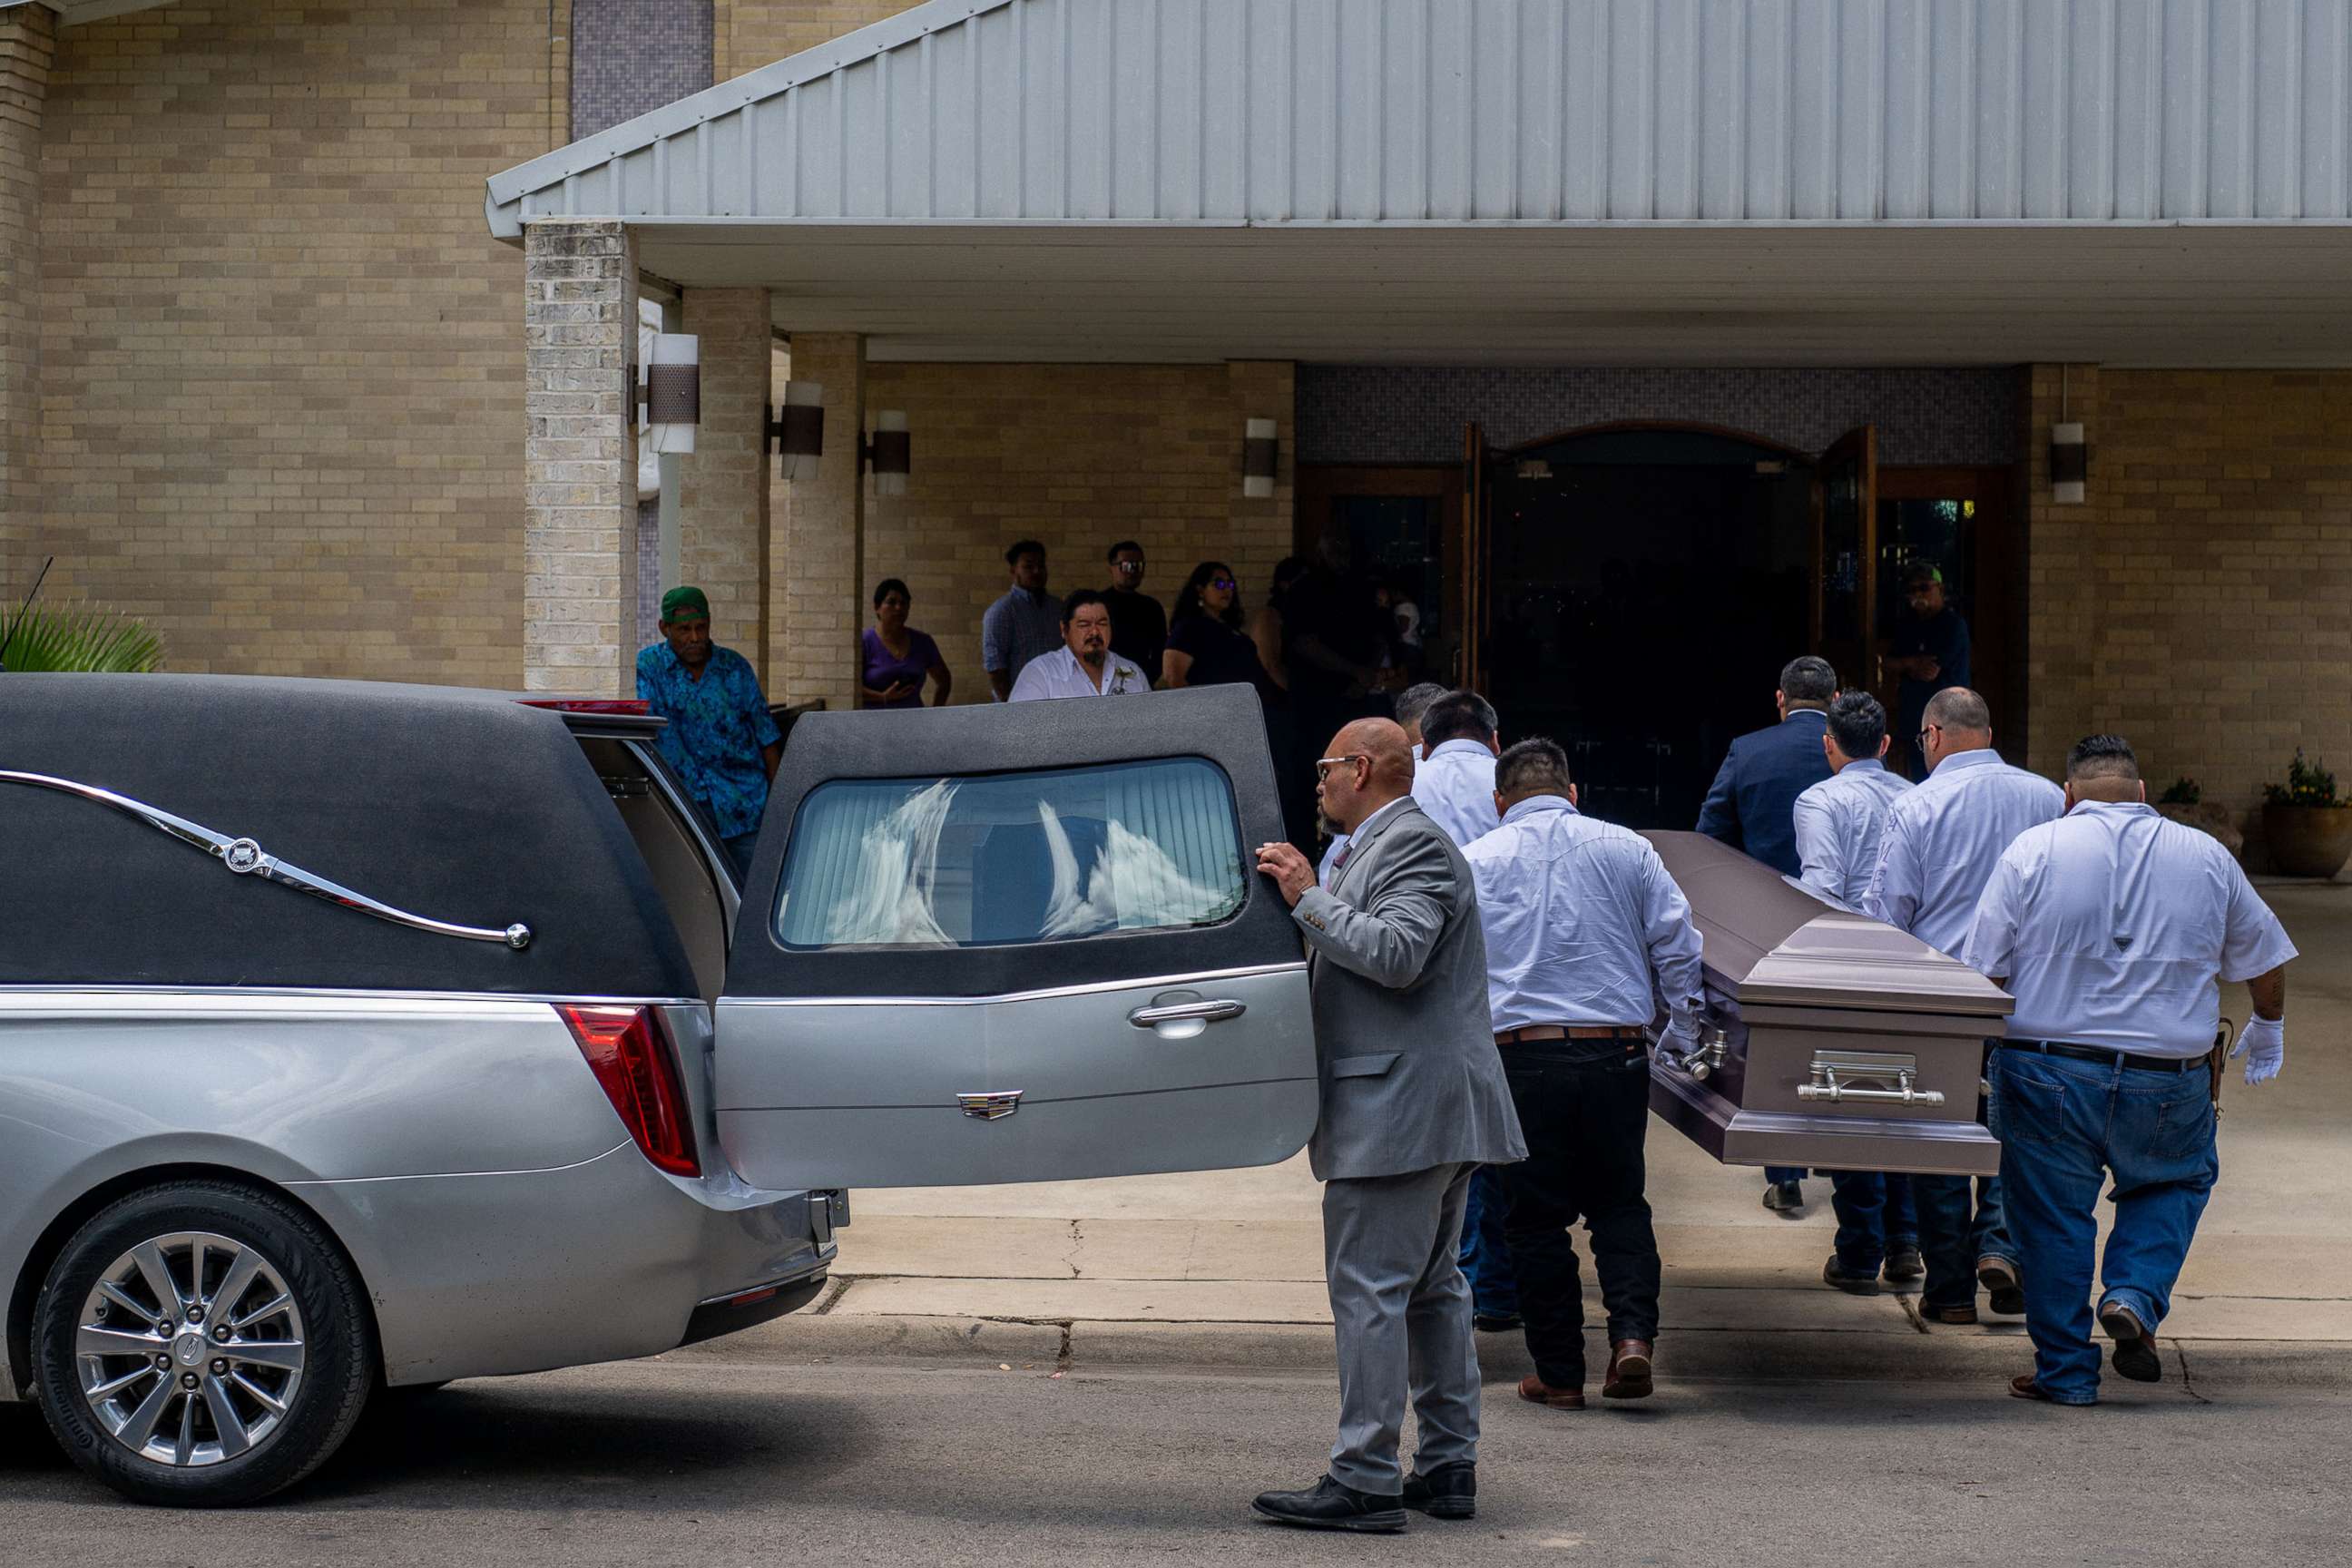 PHOTO: The casket of Amerie Jo Garza, 10, is carried into her funeral service in Uvalde, Texas, May 31, 2022.